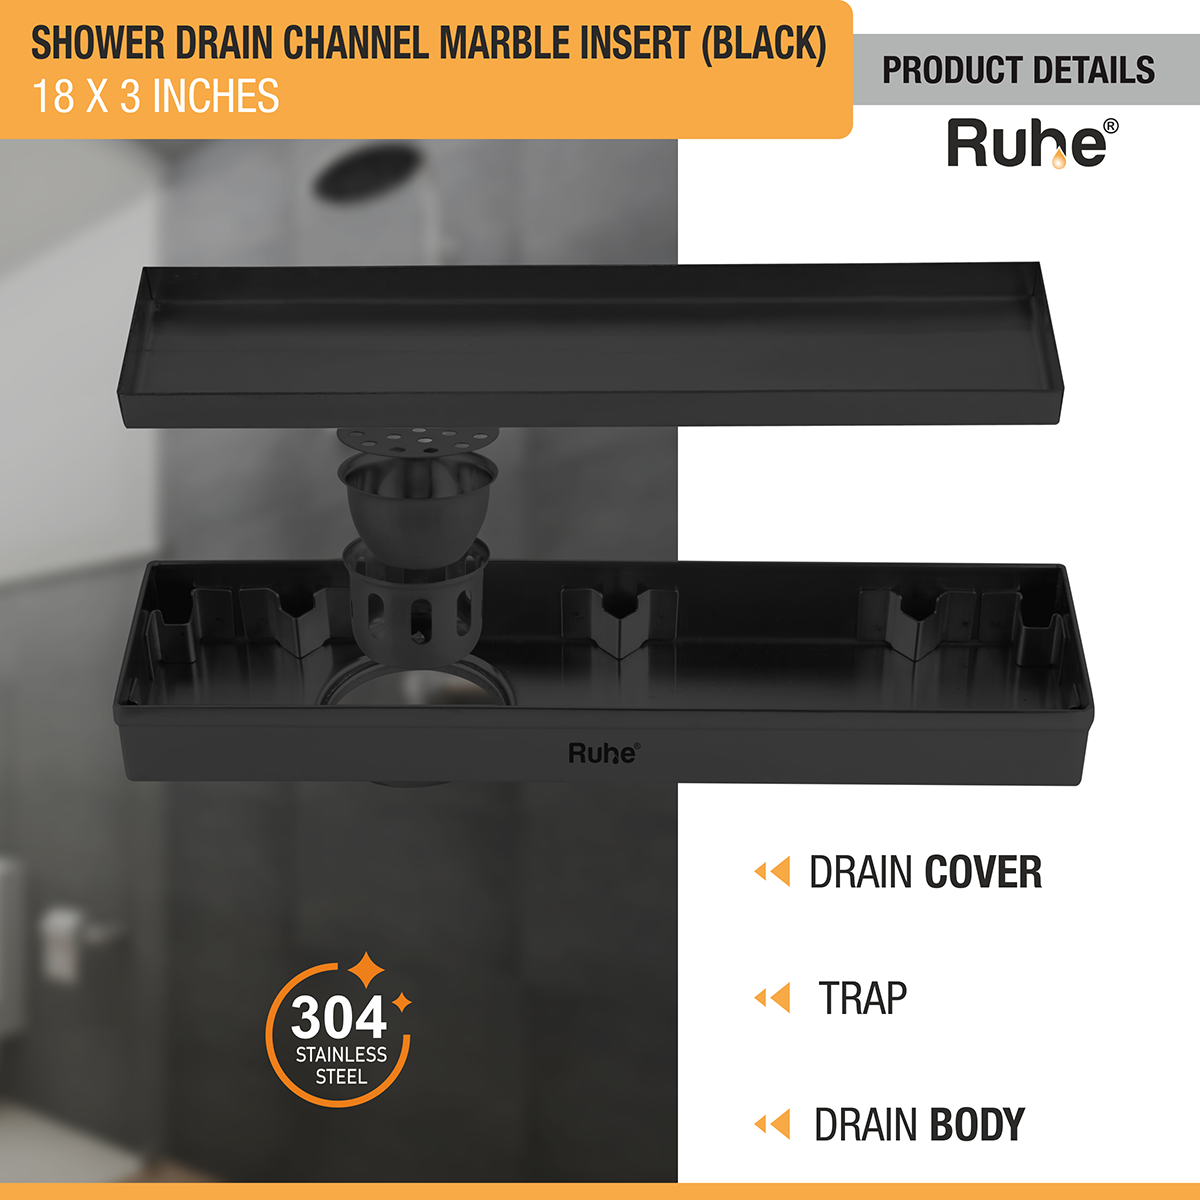 Marble Insert Shower Drain Channel (18 x 3 Inches) Black PVD Coated - by Ruhe®